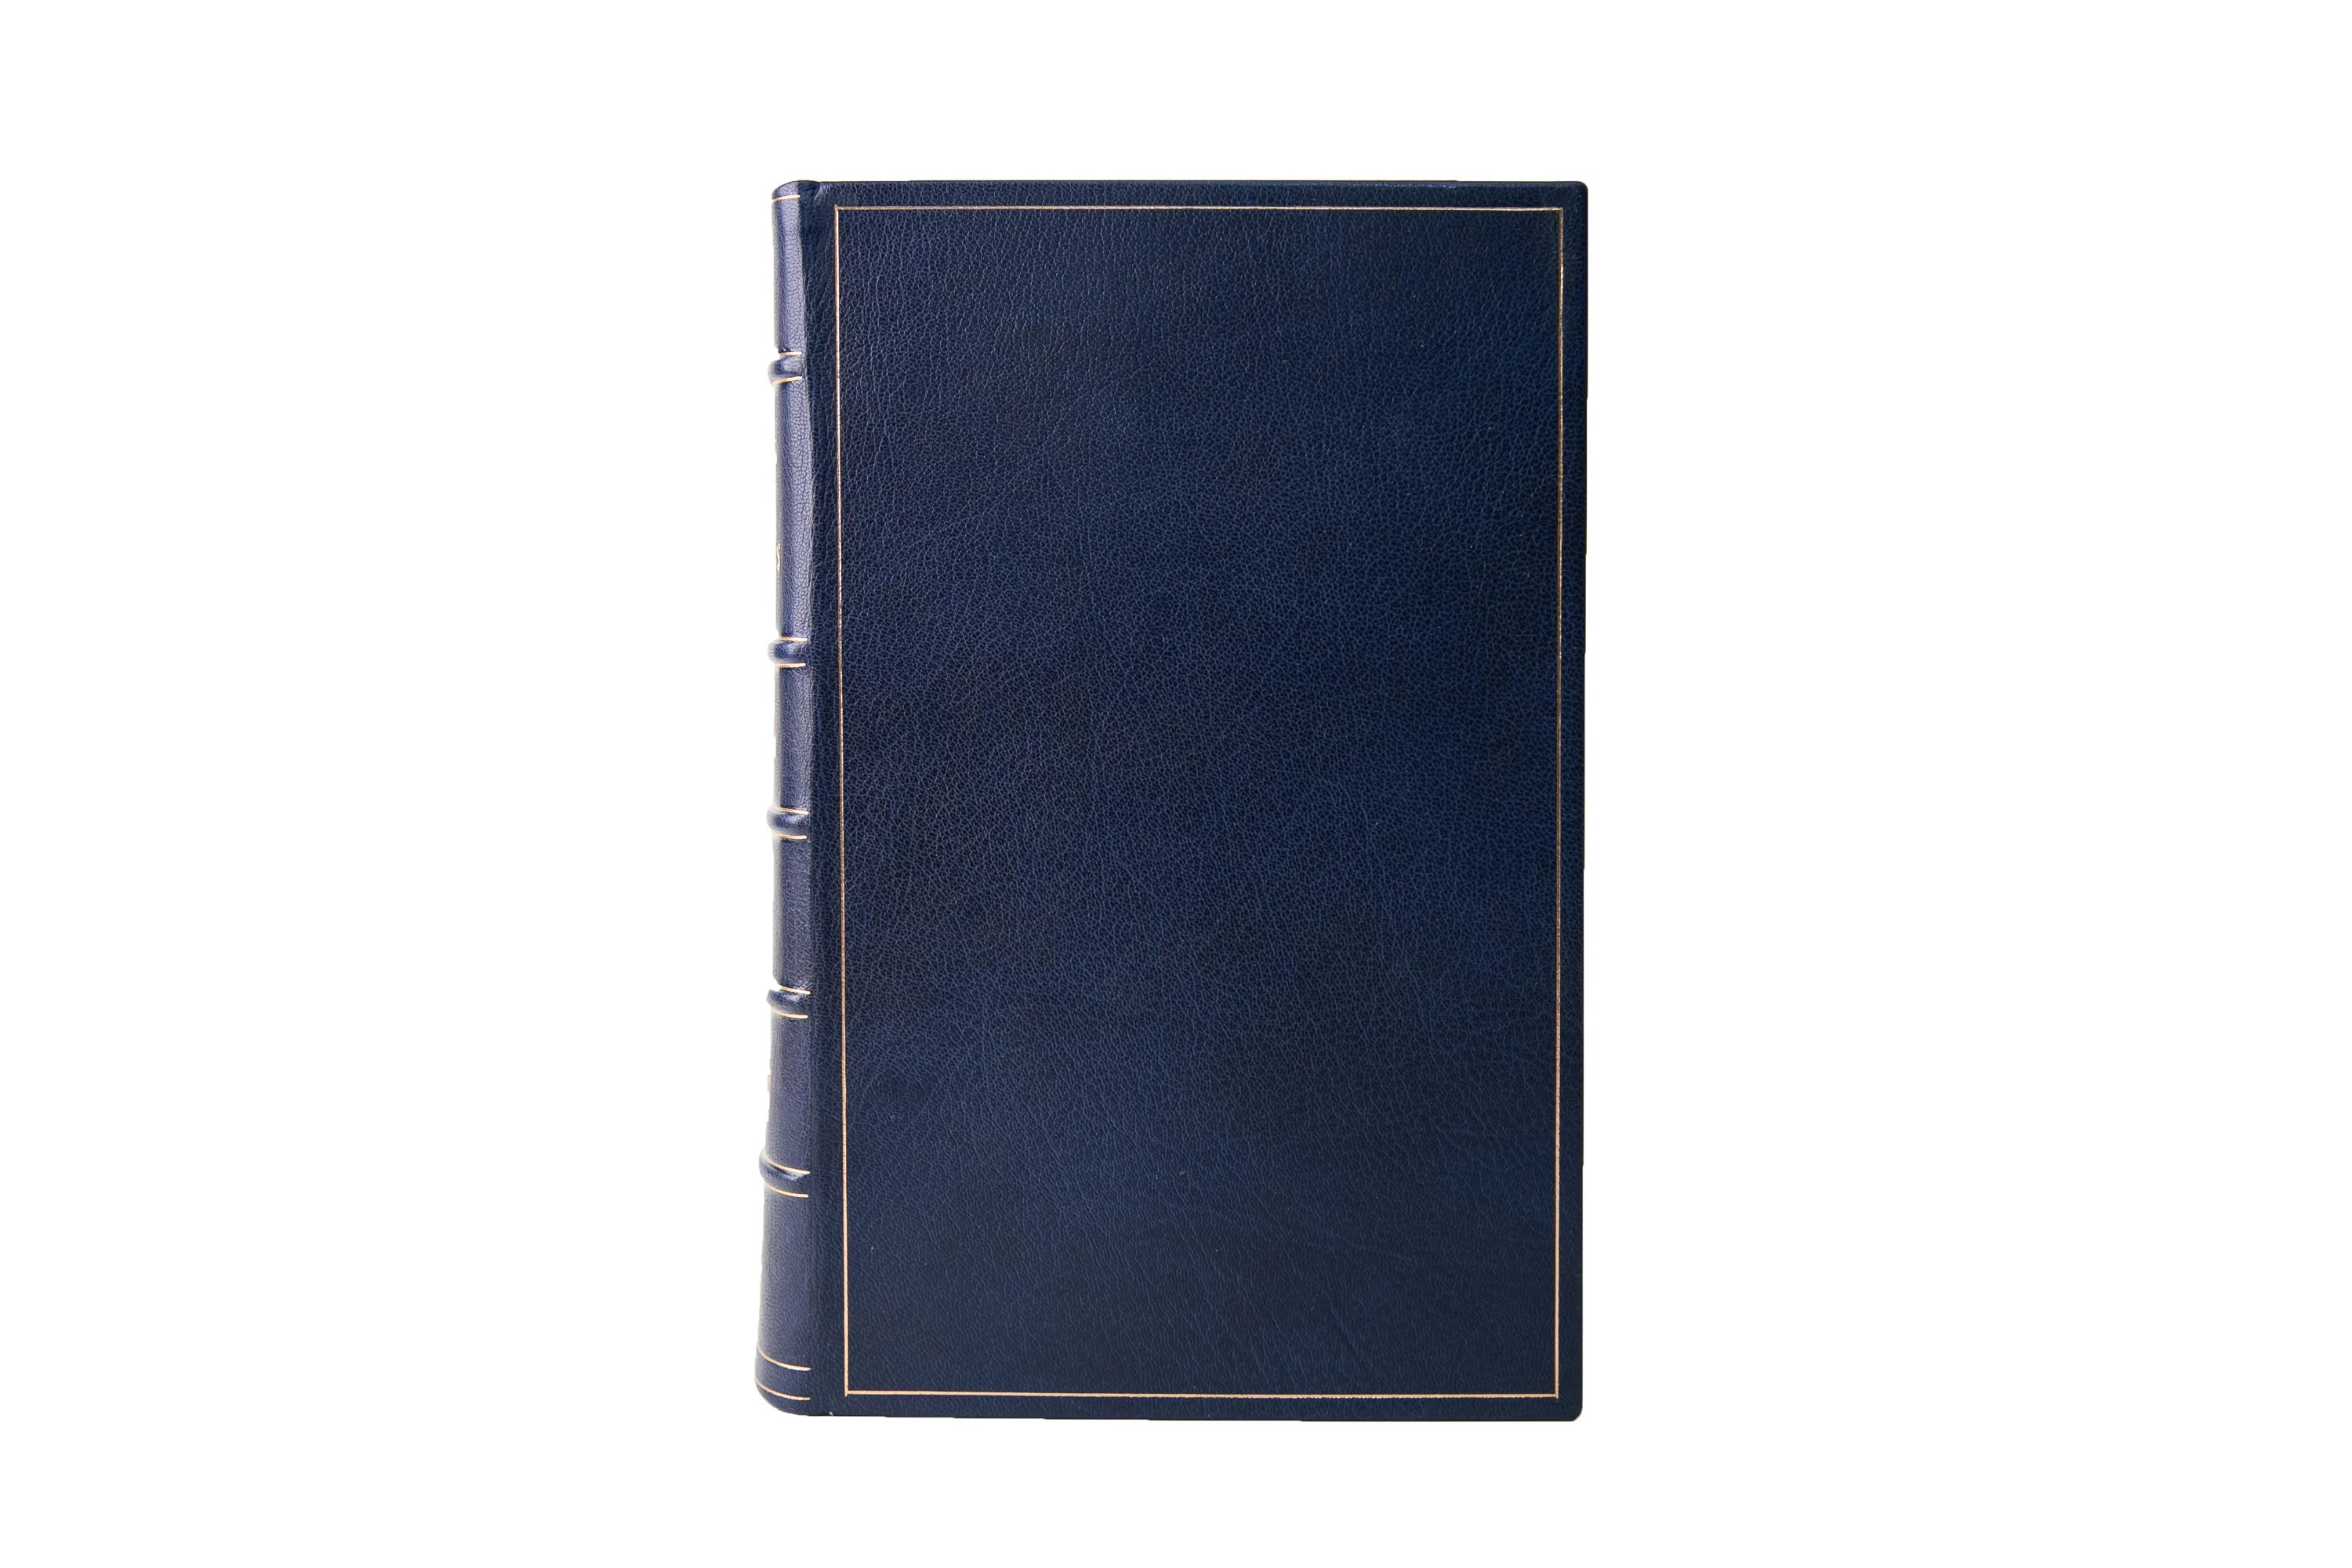 1 Volume. Thompson & Lawson, The Lawson History of America's CVP. Limited Edition. Bound in full blue morocco with a gilt-tooled border on the covers. Raised bands with panels displaying nautical details, bordering, and label lettering, all